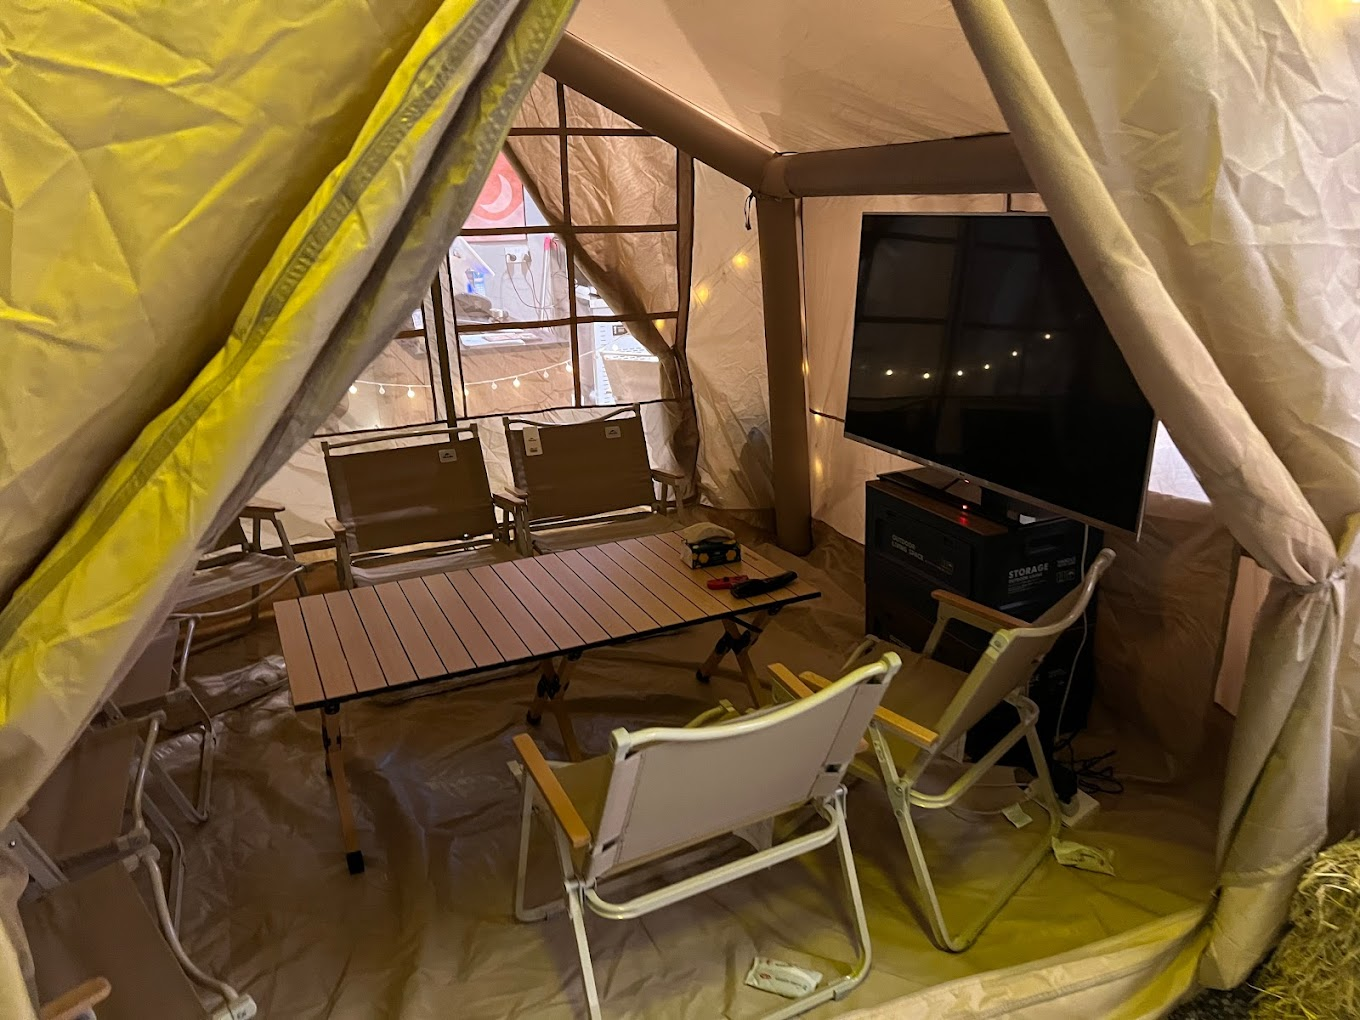 me cafe & games - glamping tents